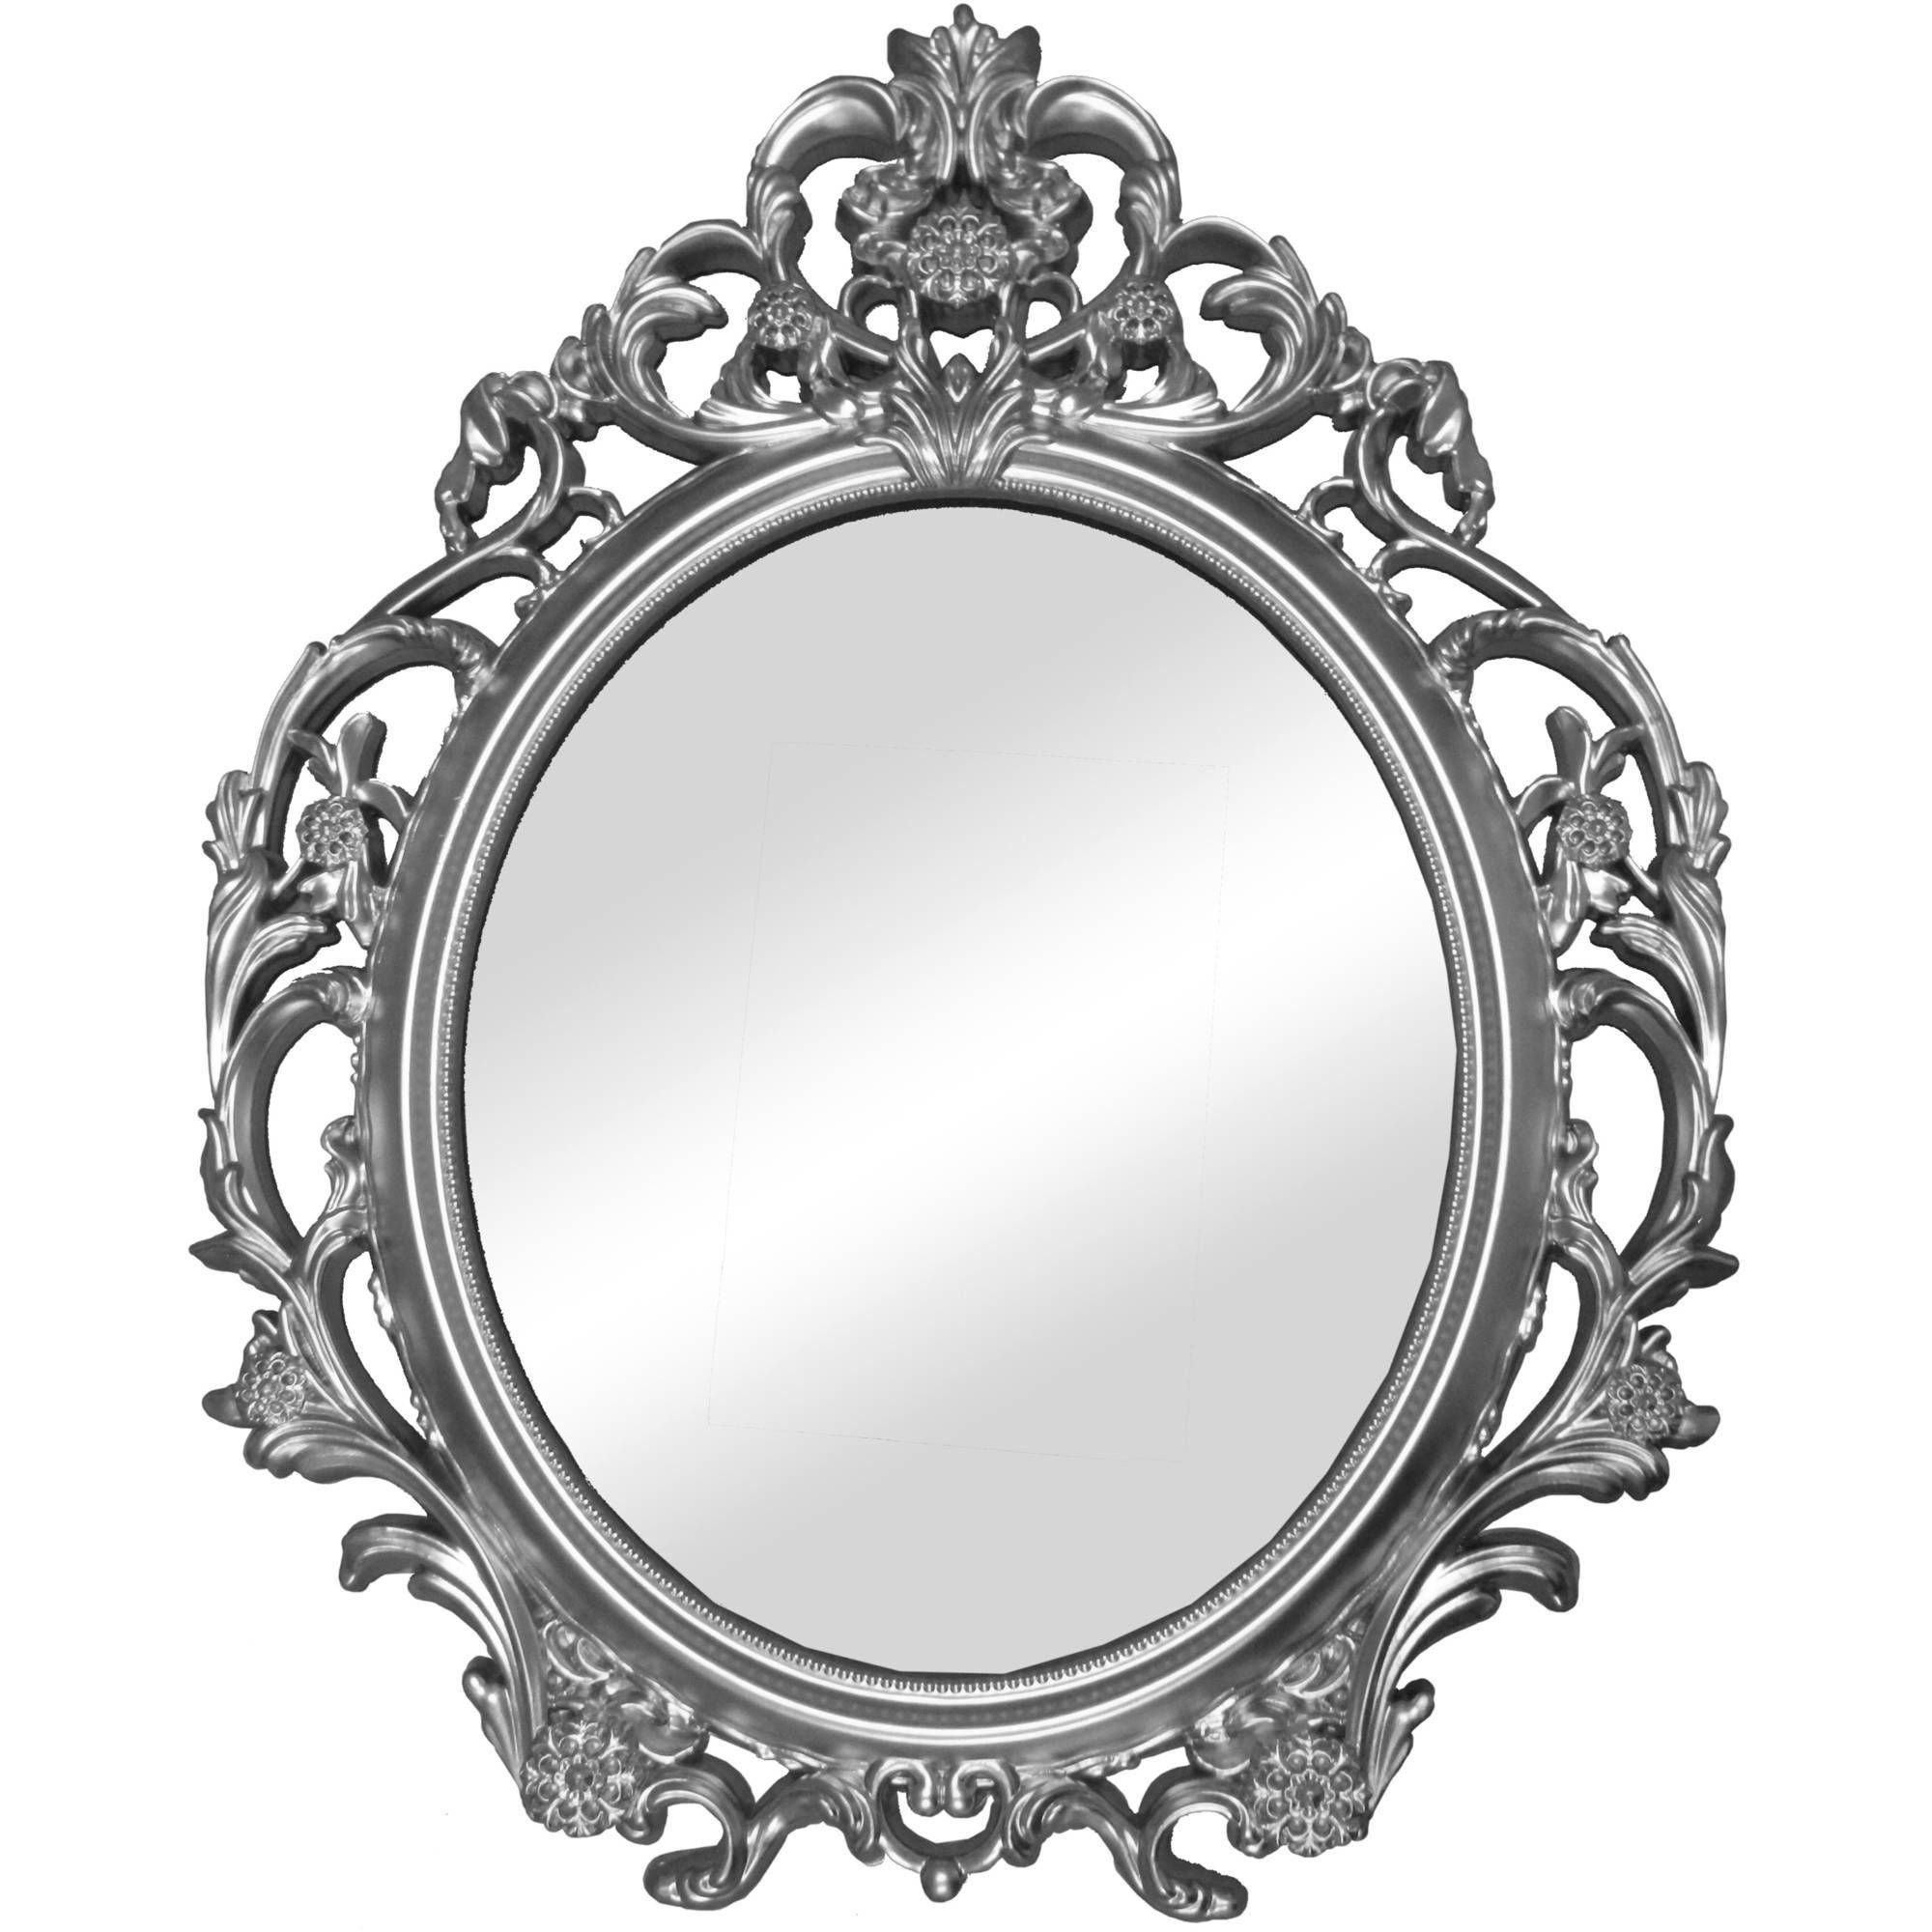 Better Homes And Gardens Ornate Baroque Wall Mirror – Walmart In Baroque Black Mirrors (View 9 of 15)